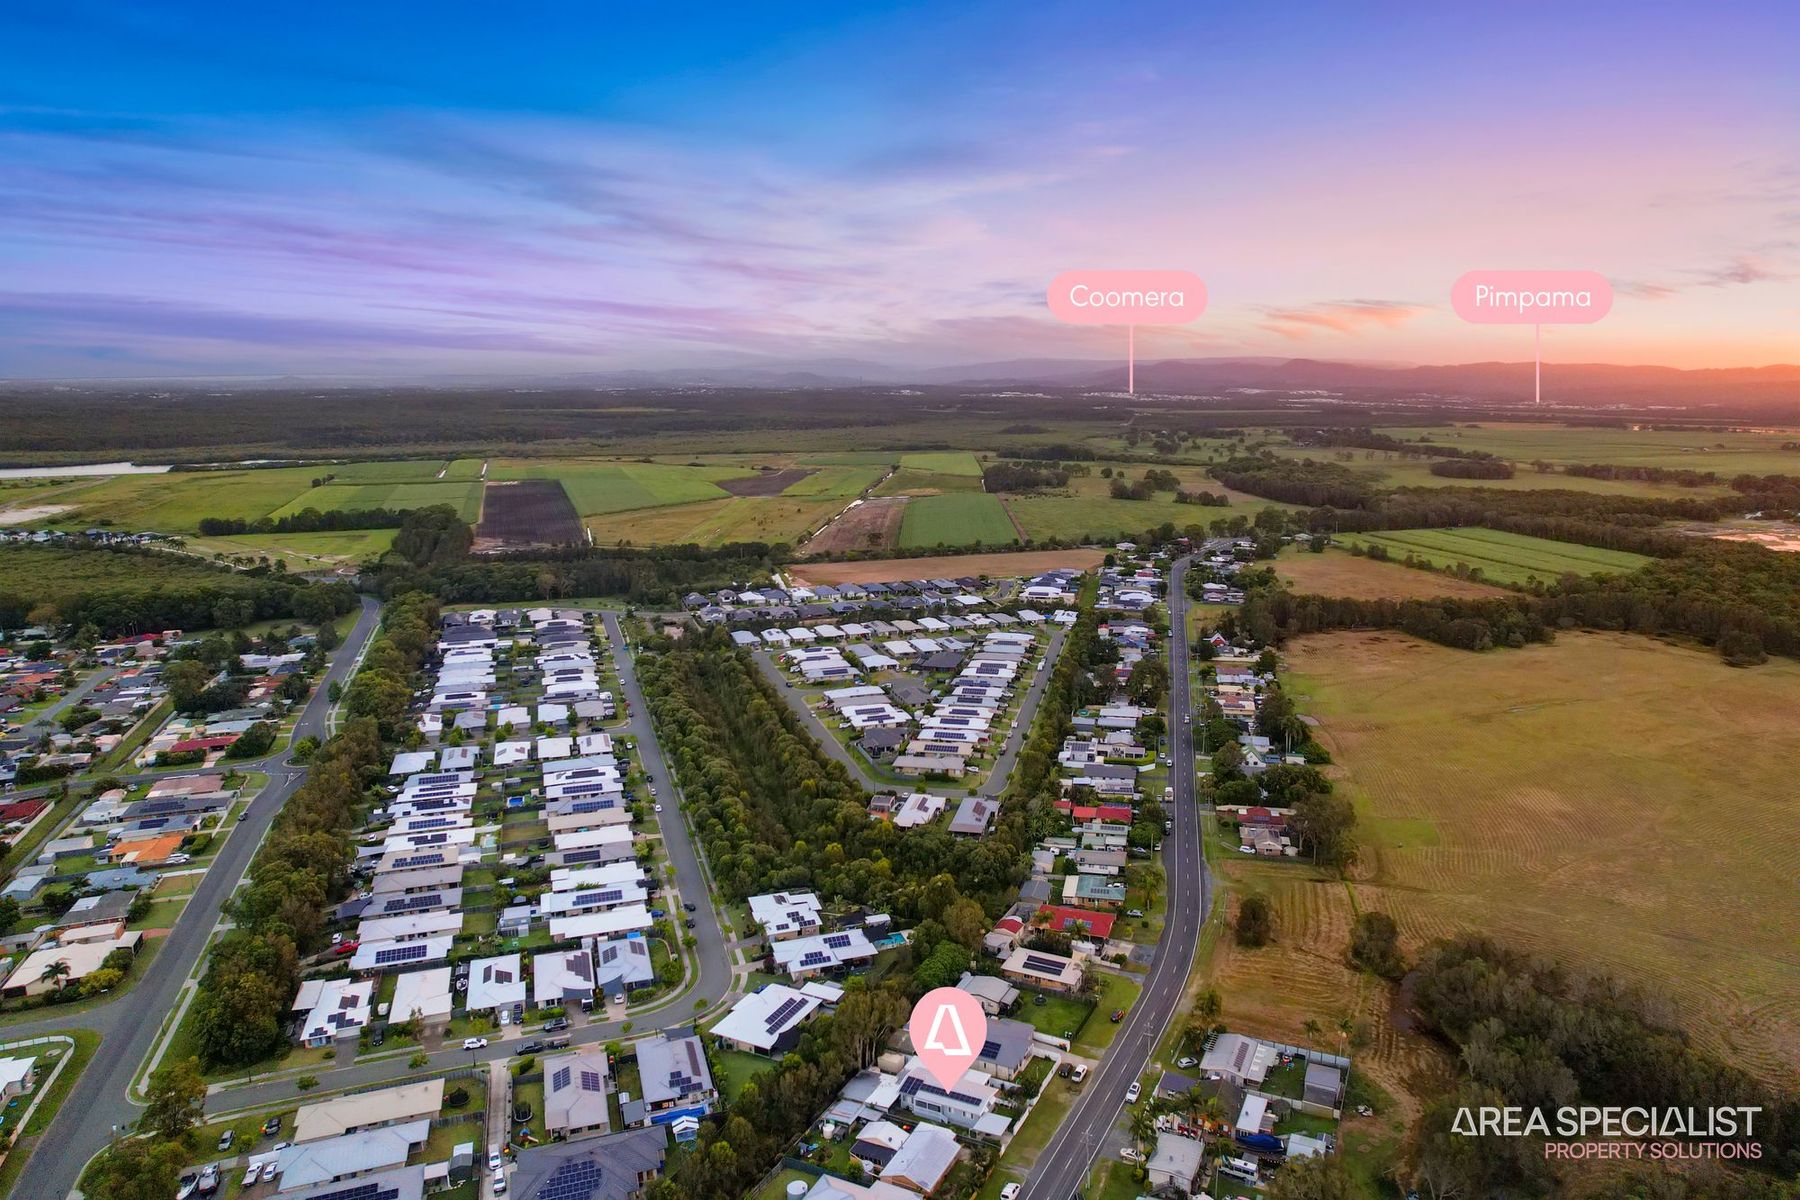 1110 Pimpama Jacobs Well Rd, Jacobs Well QLD 4208 Drone (6)